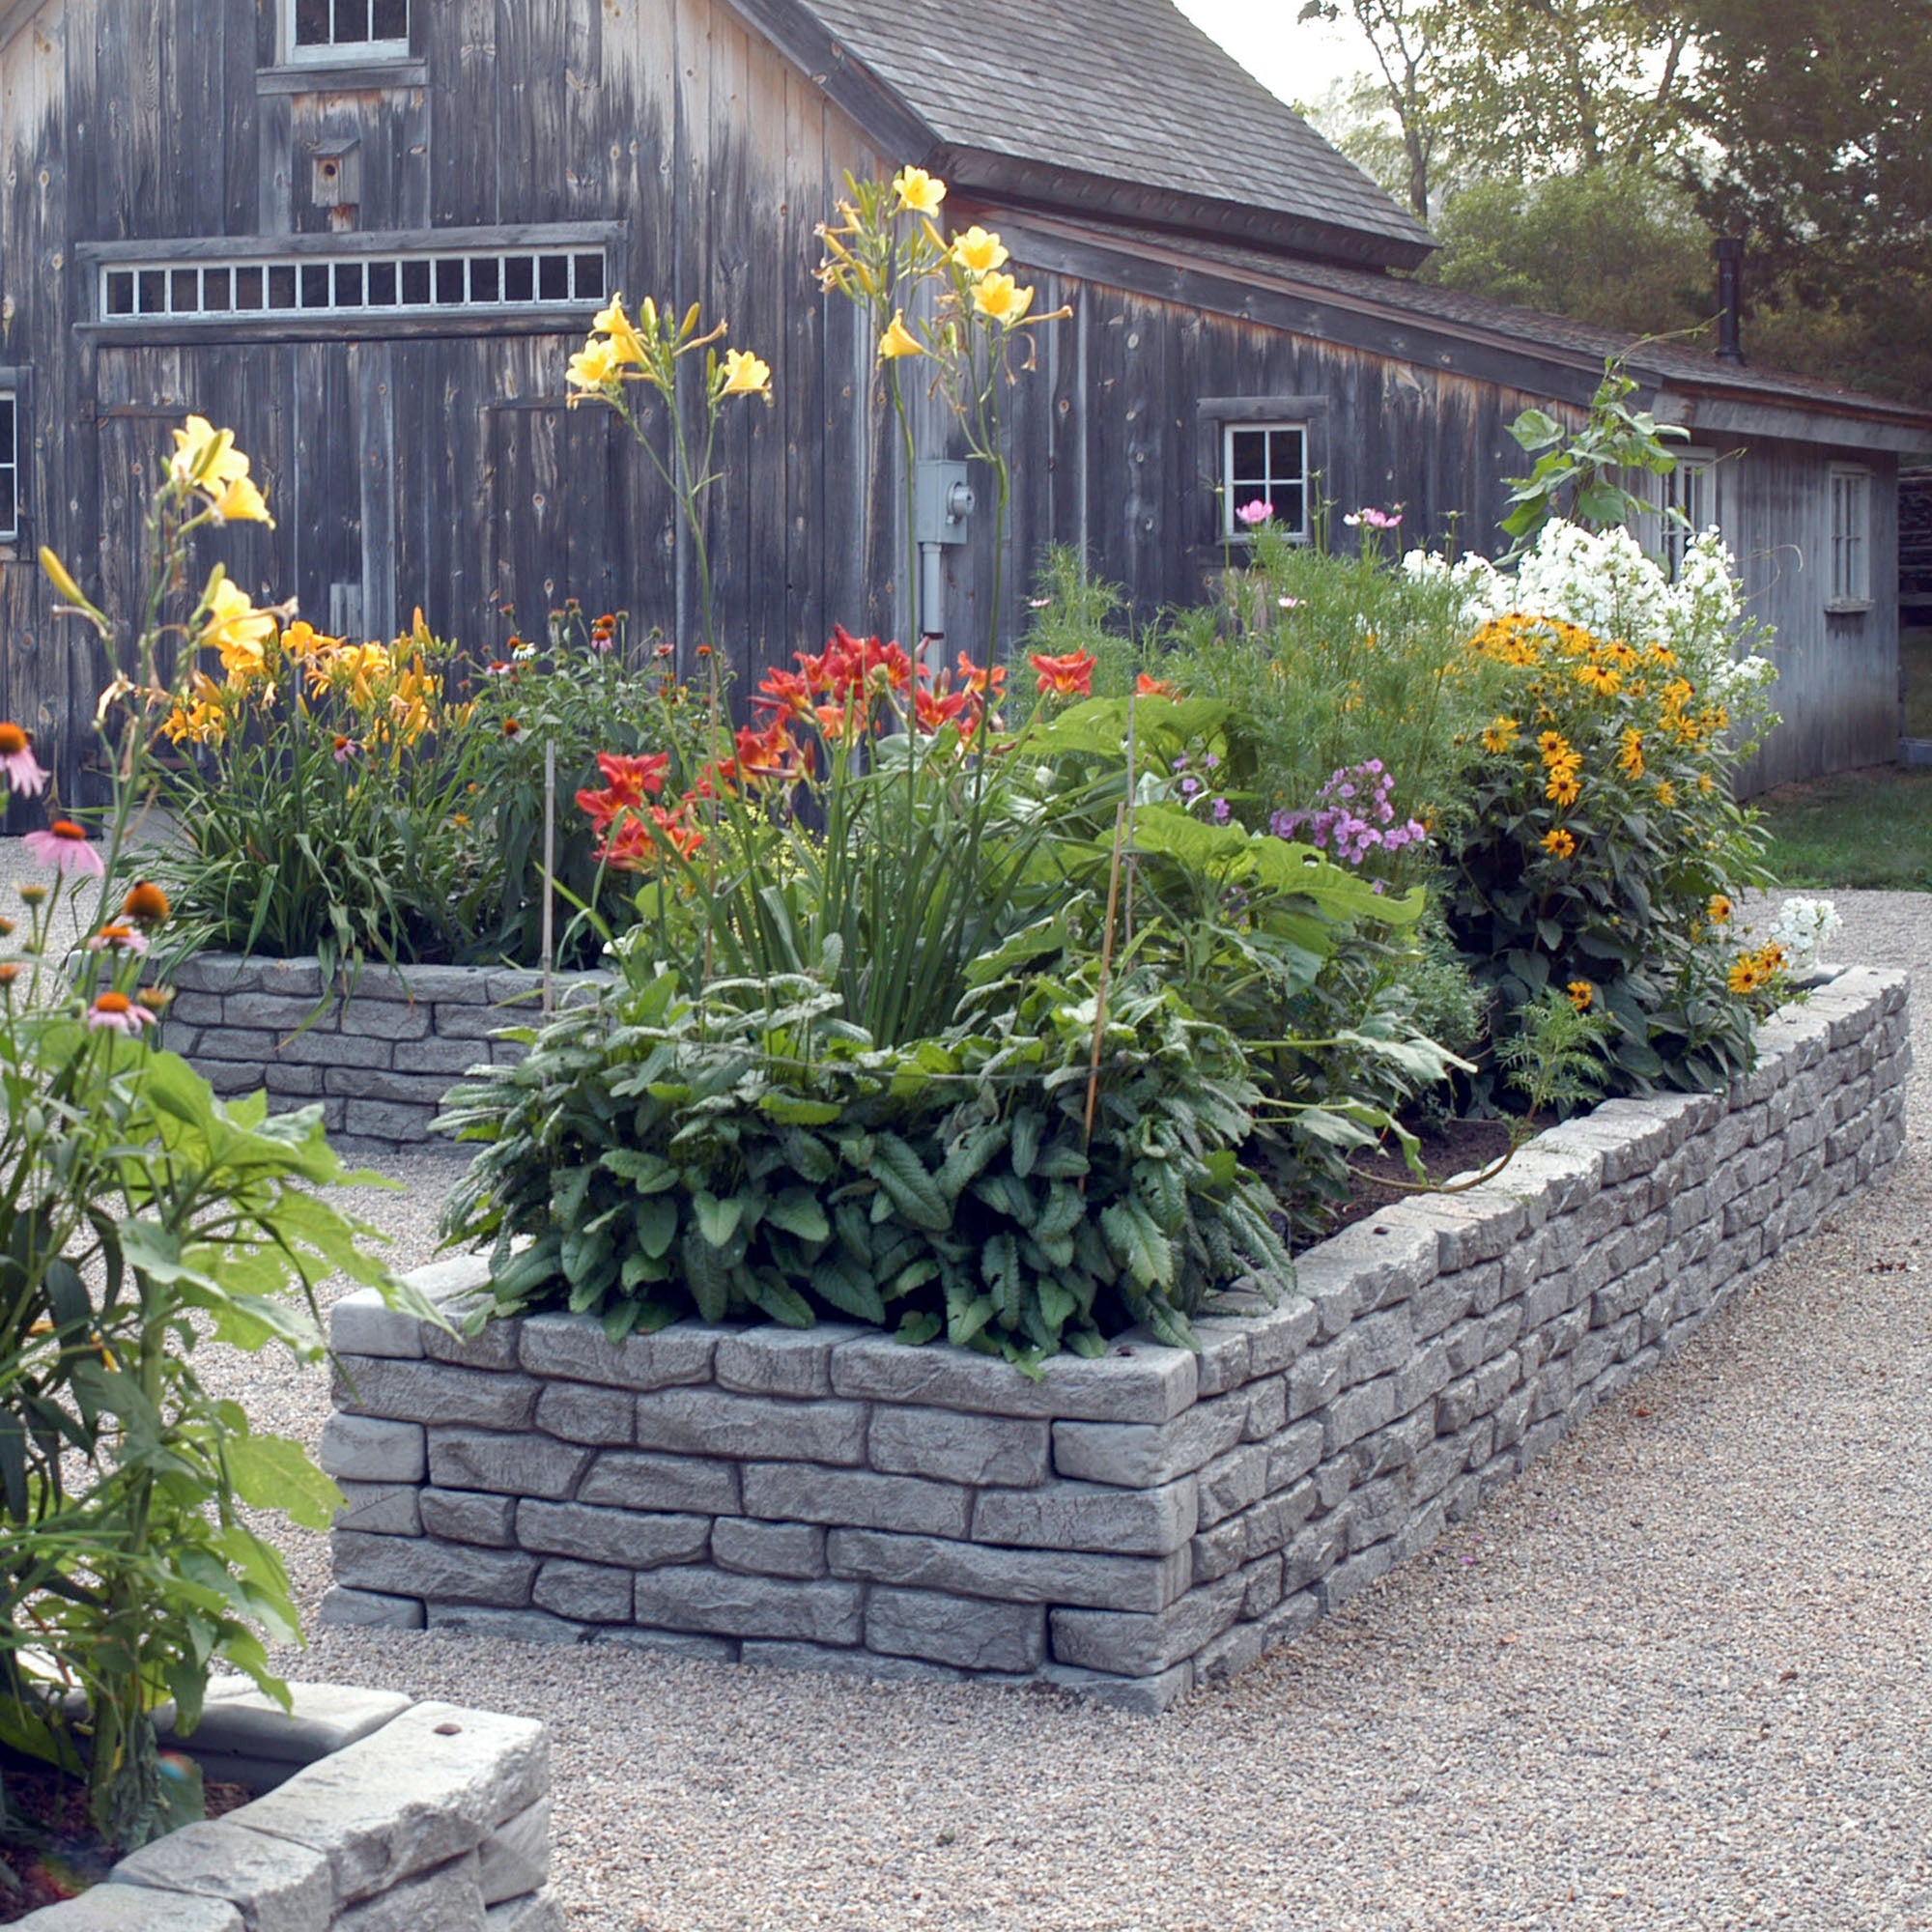 Straight rock lock assembled two high to create garden bed with flowers inside and barn in background